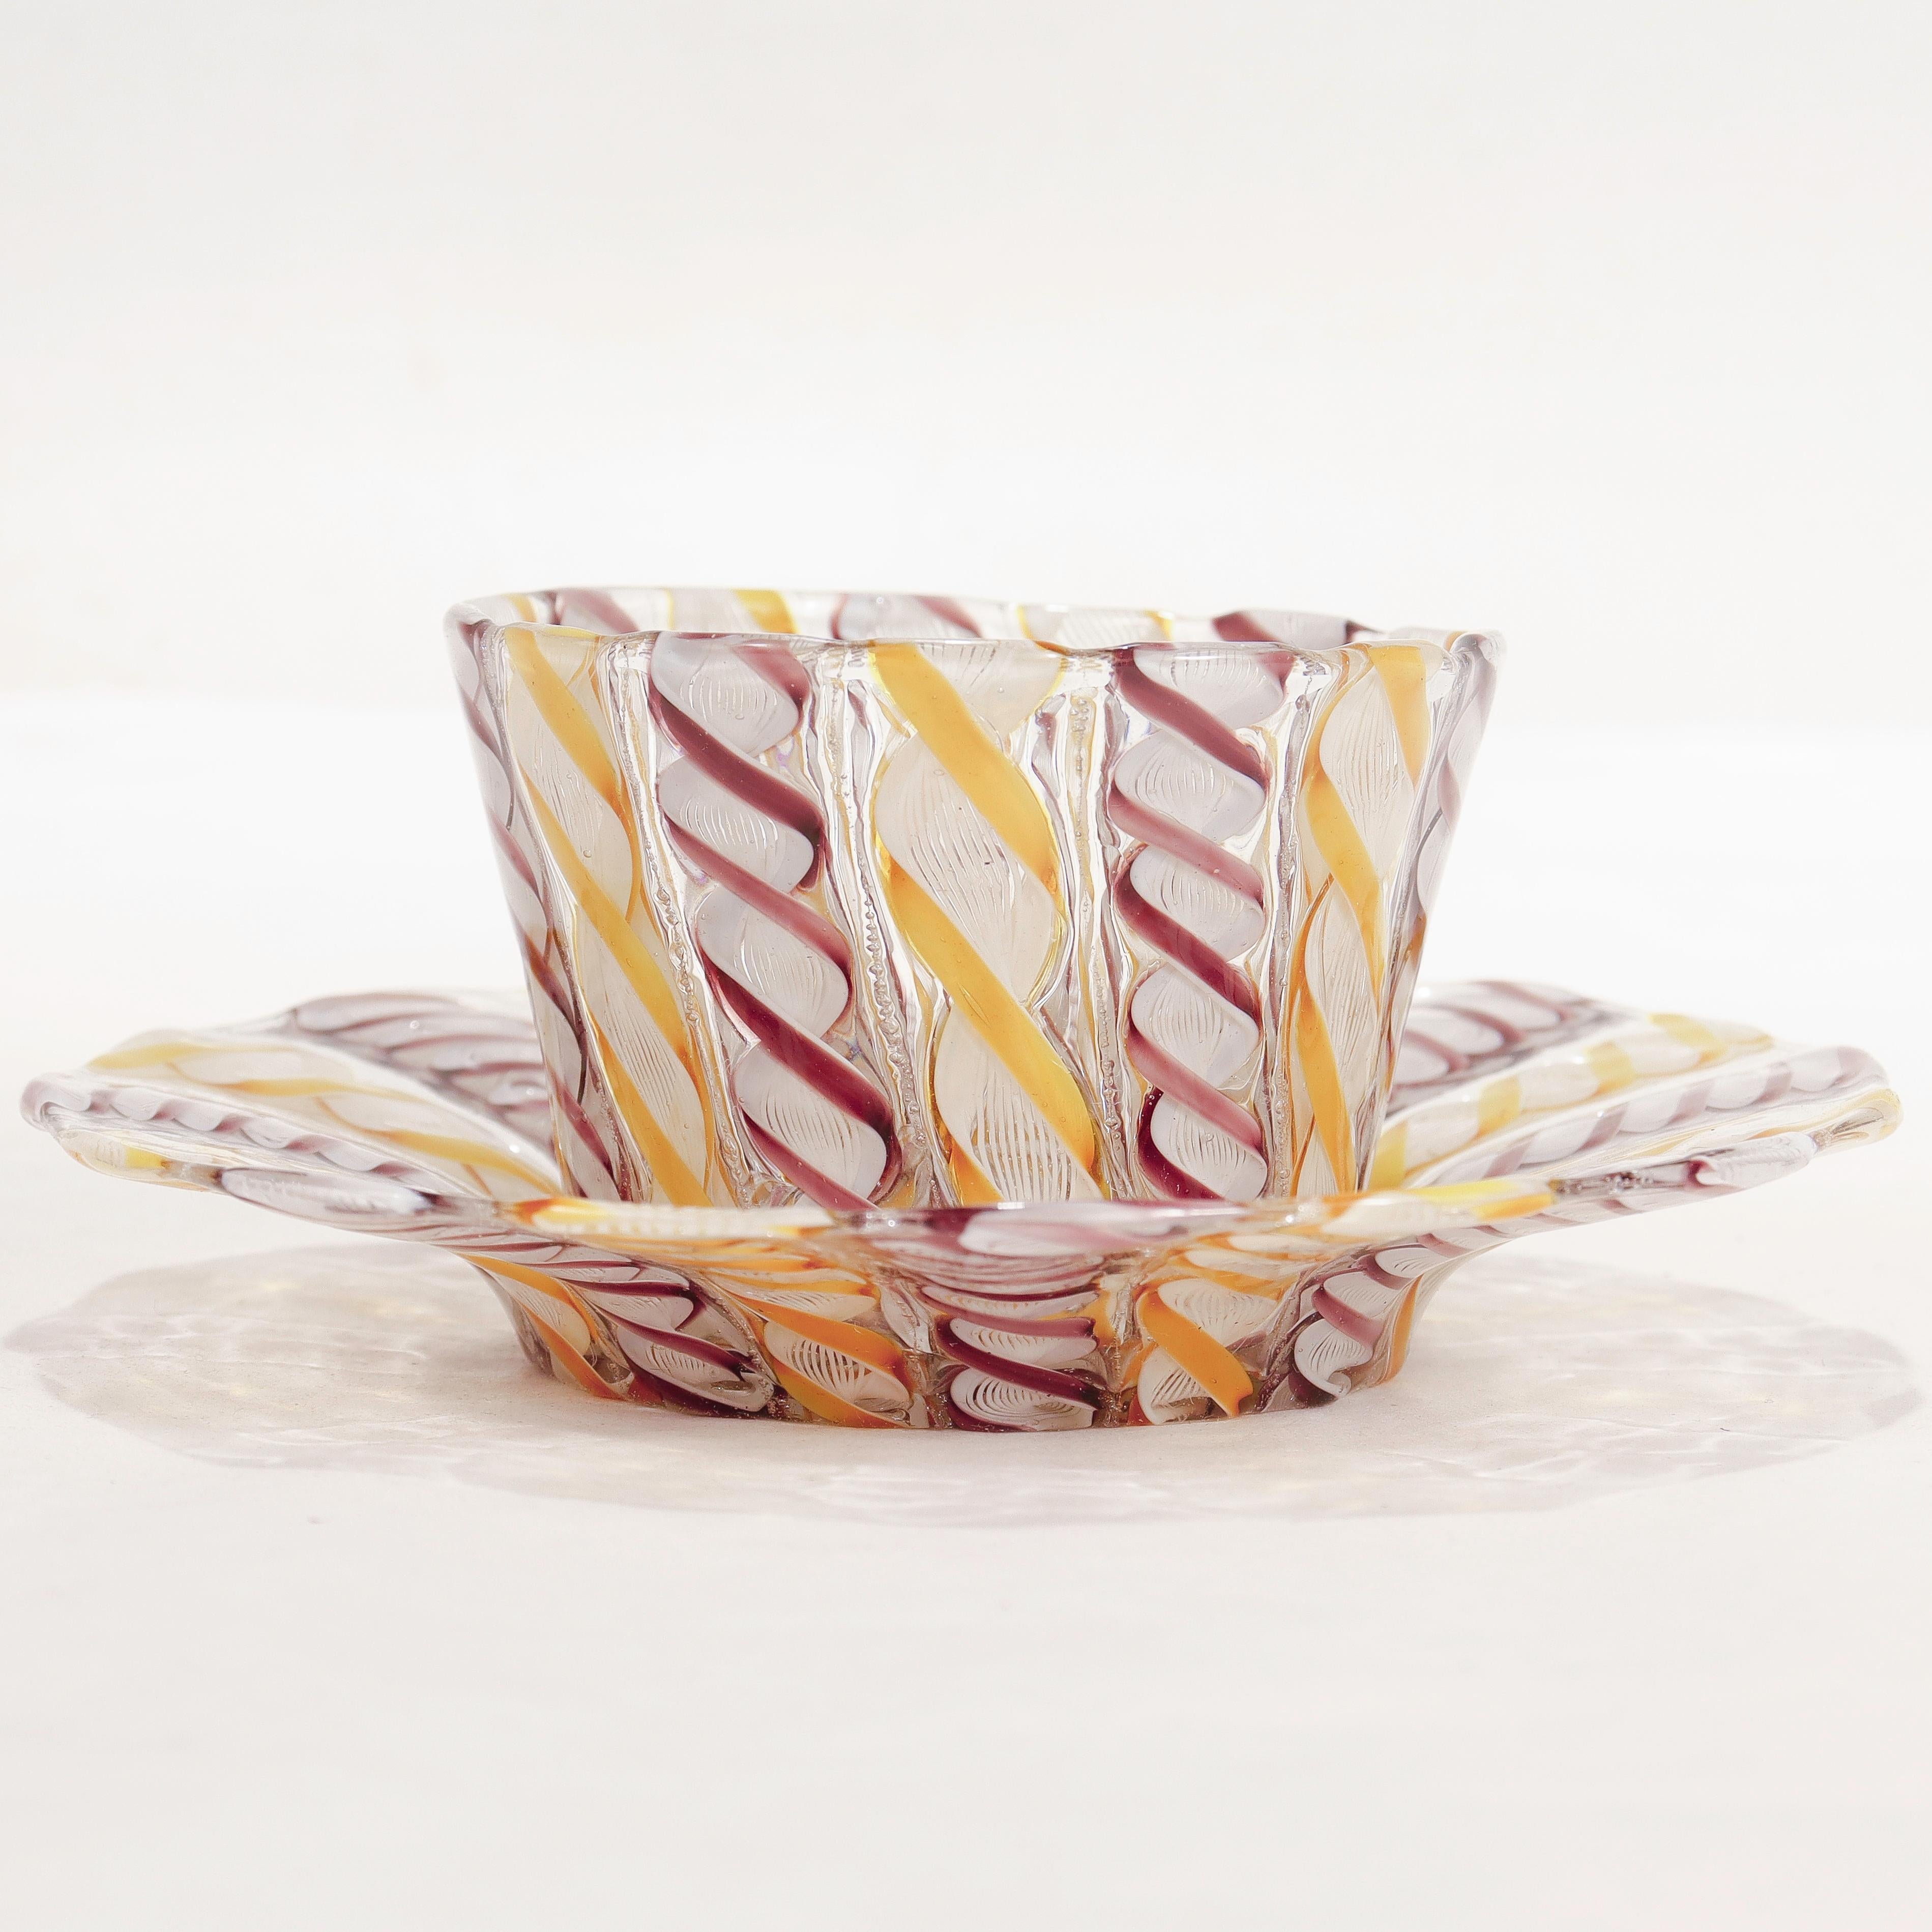 A fine vintage Italian glass finger bowl or handleless cup & saucer.

Attributed to Salviati.

Comprised of Zanfirico canes with purple, yellow, and white threads.

Simply a wonderful Venetian glass example!

Date:
Early 20th